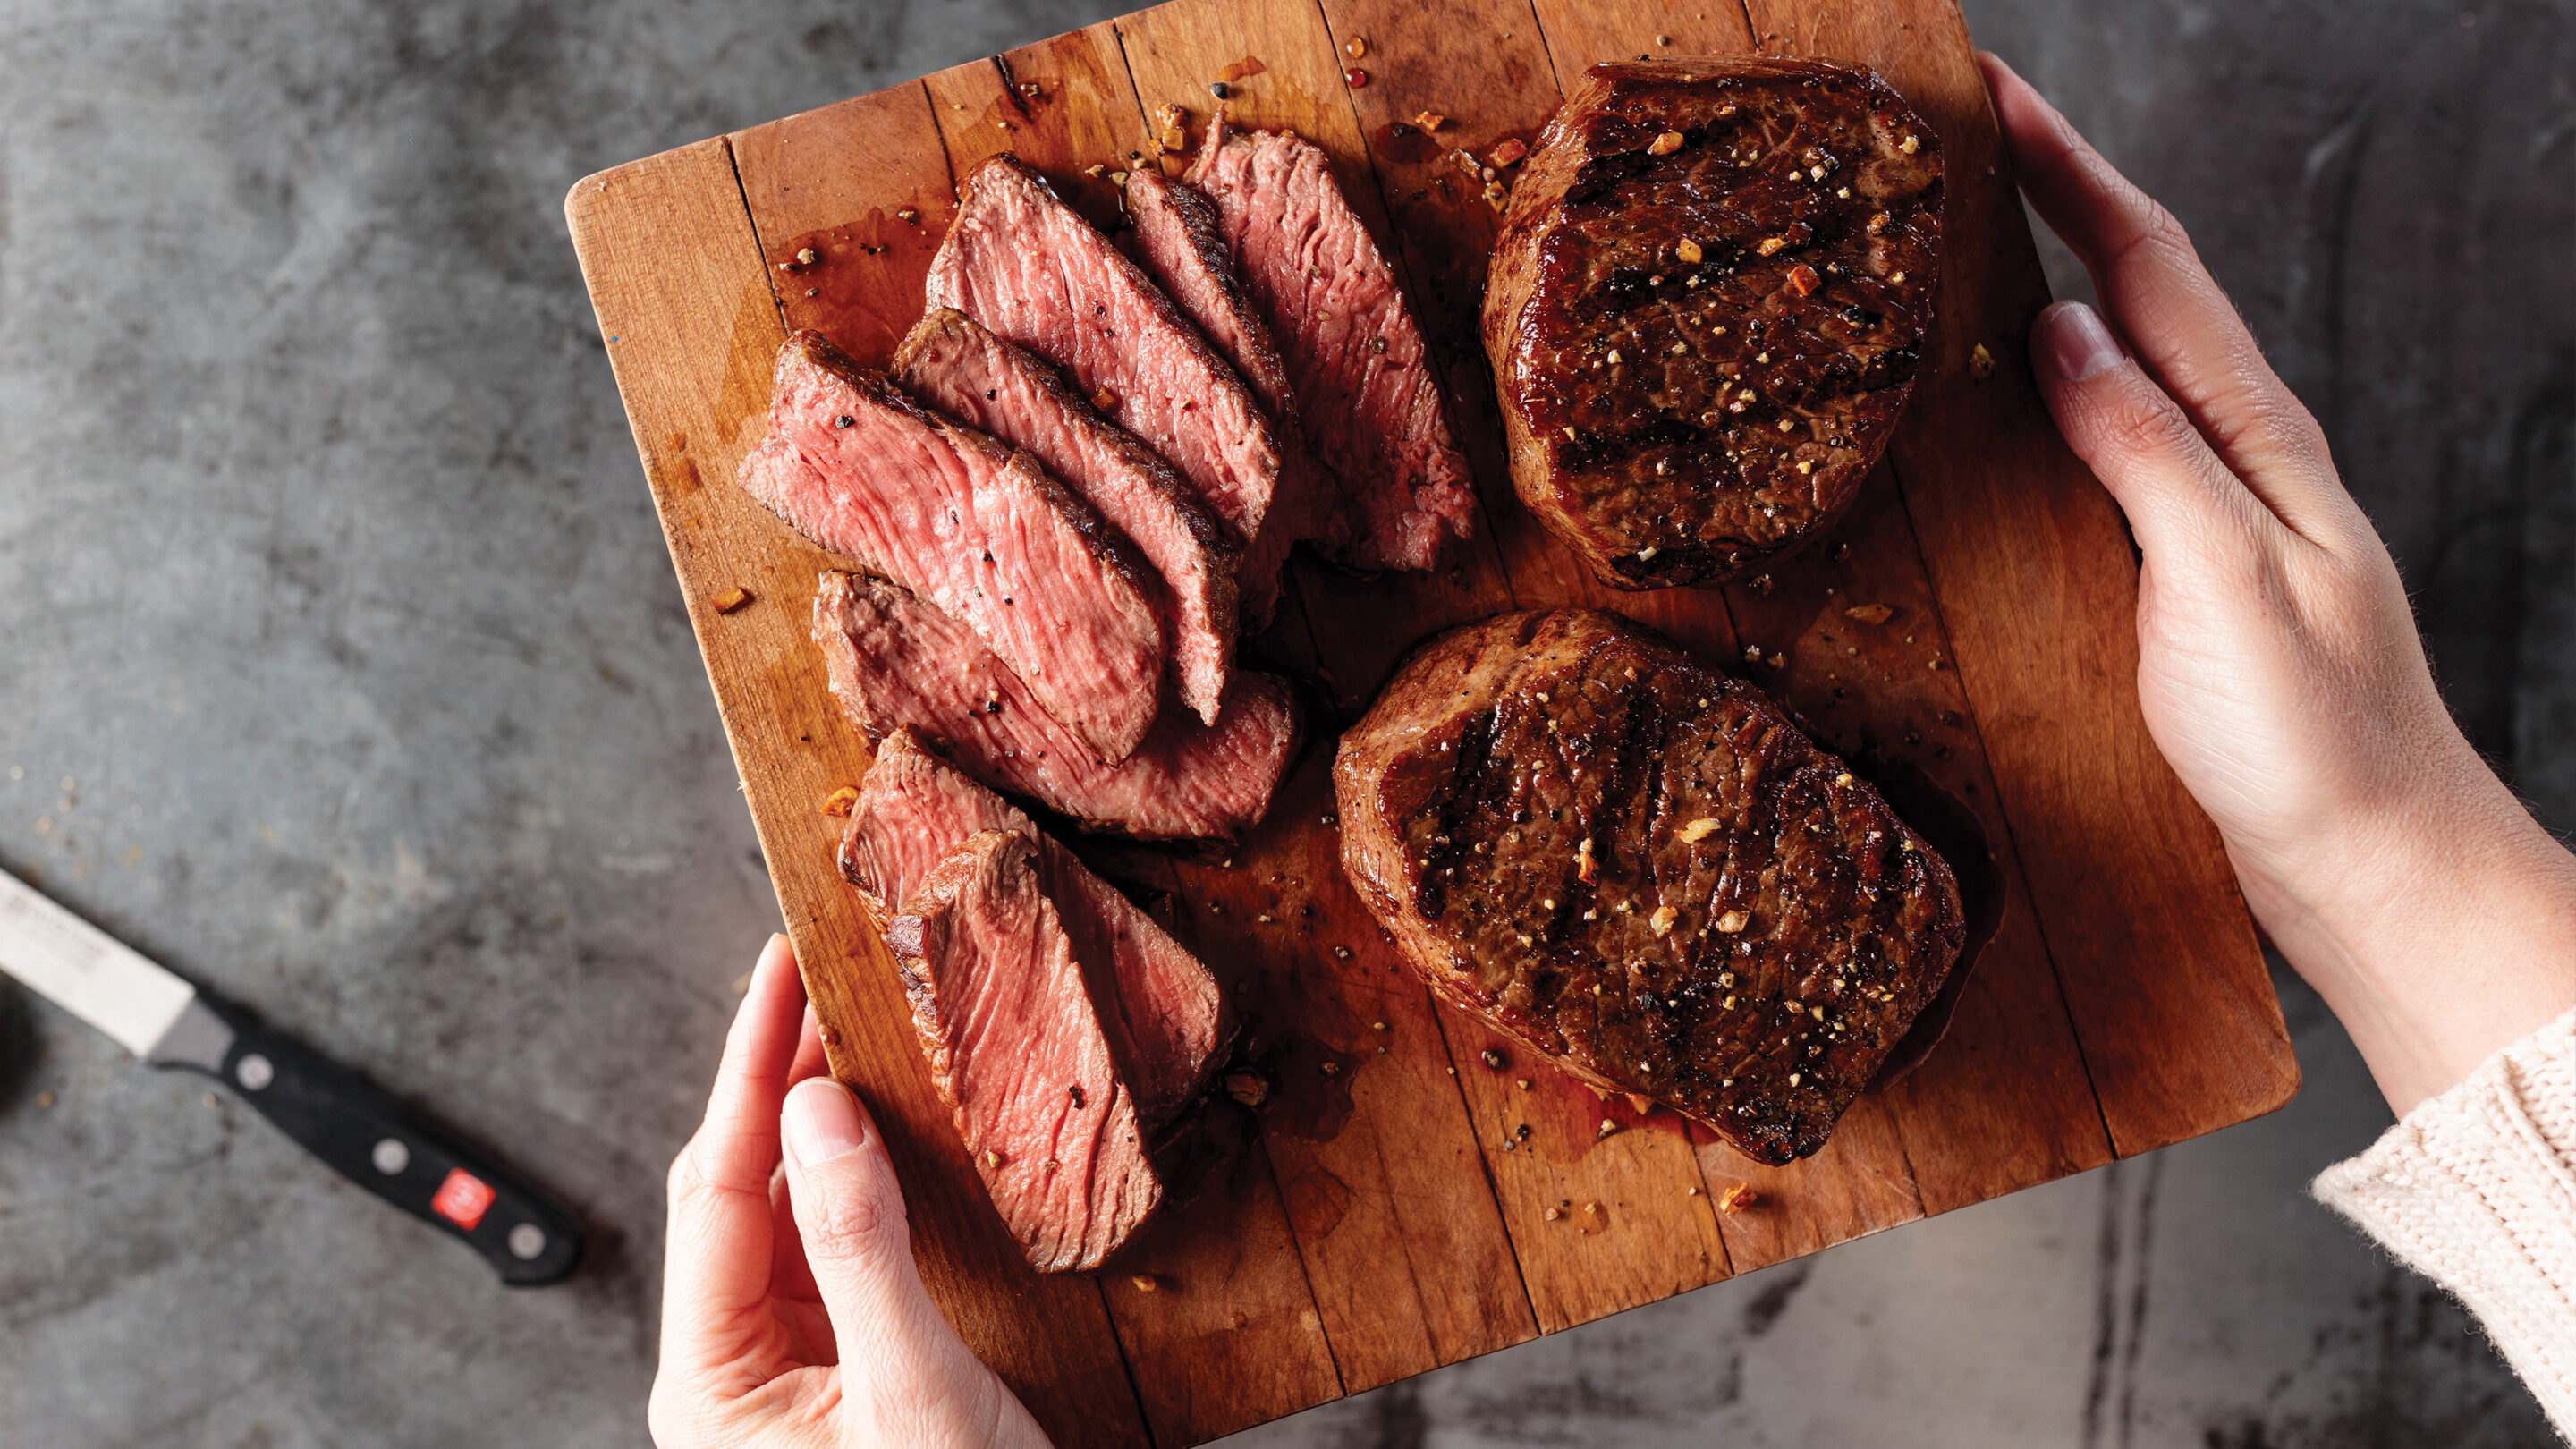 https://blog-content.omahasteaks.com/wp-content/uploads/2022/06/blogwp_how-to-cook-the-omaha-cut-ribeye-scaled-1.jpg